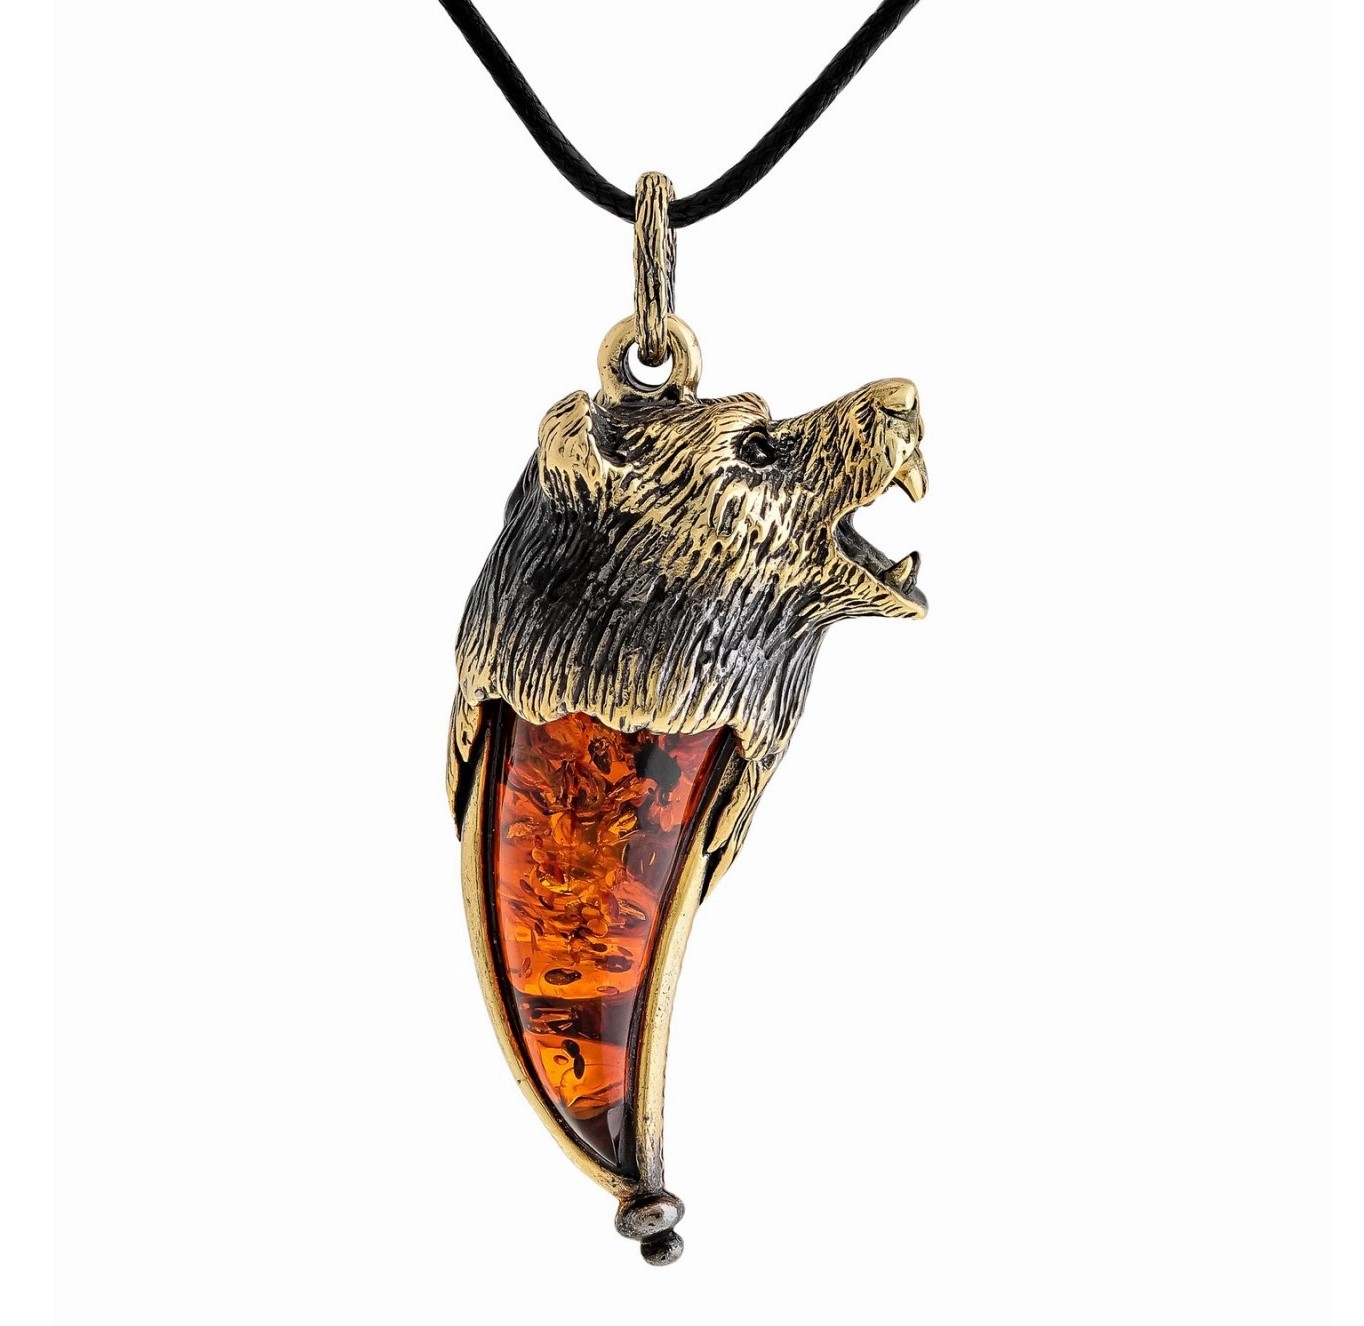 Angry Bear Necklace 316L Stainless Steel Wild Animal Beast Men Pendant 23